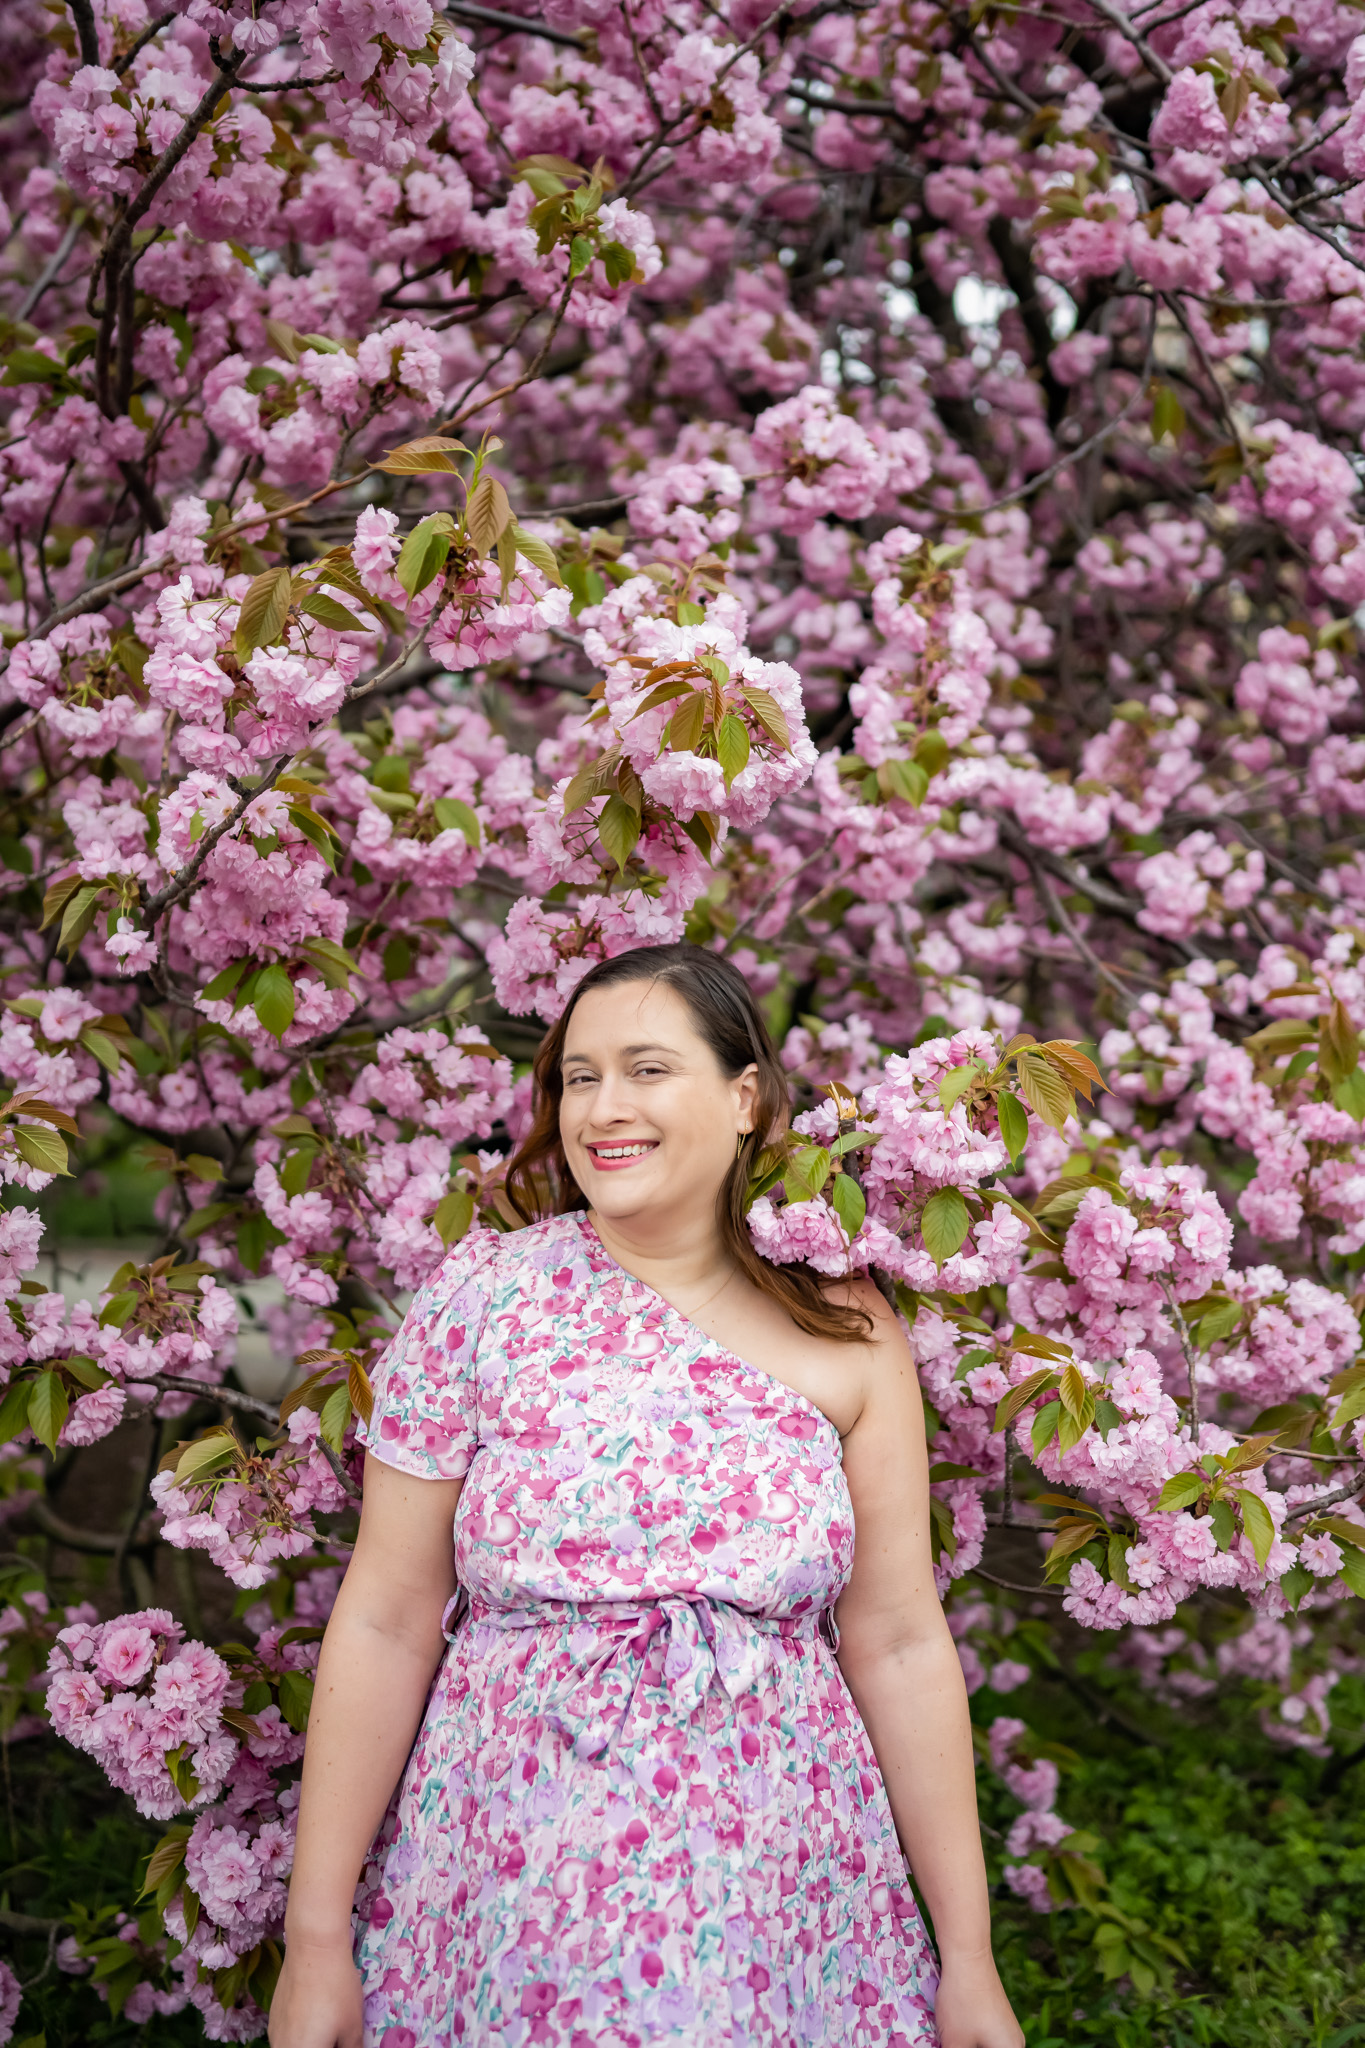 Floral dress and spring flowers